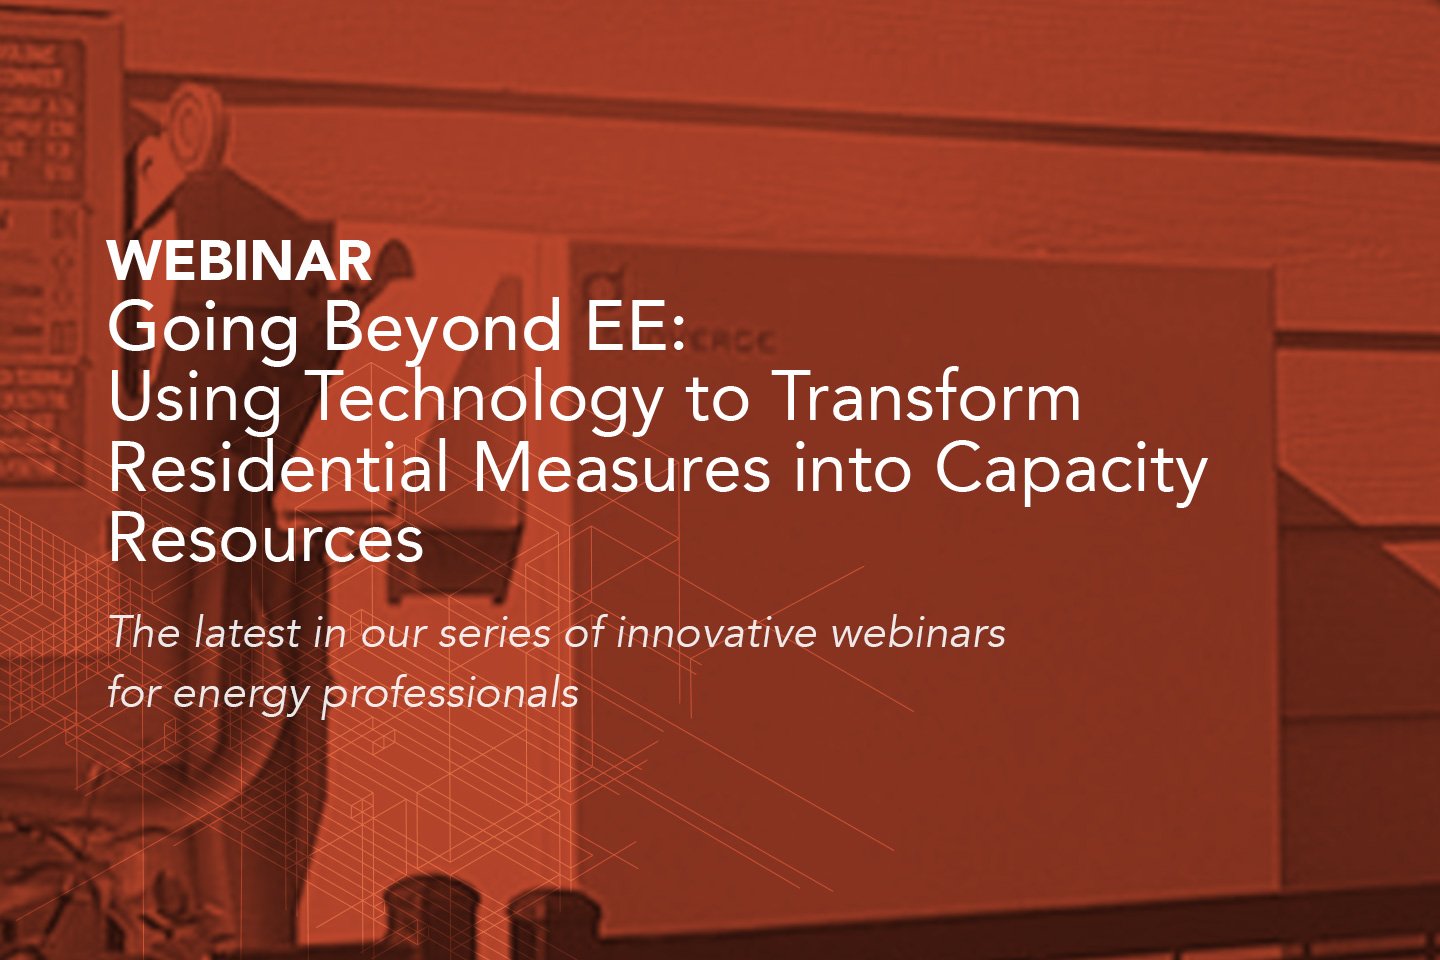 CLEAResult Webinar: Going Beyond EE - Using Technology to Transform Residential Measures into Capacity Resources